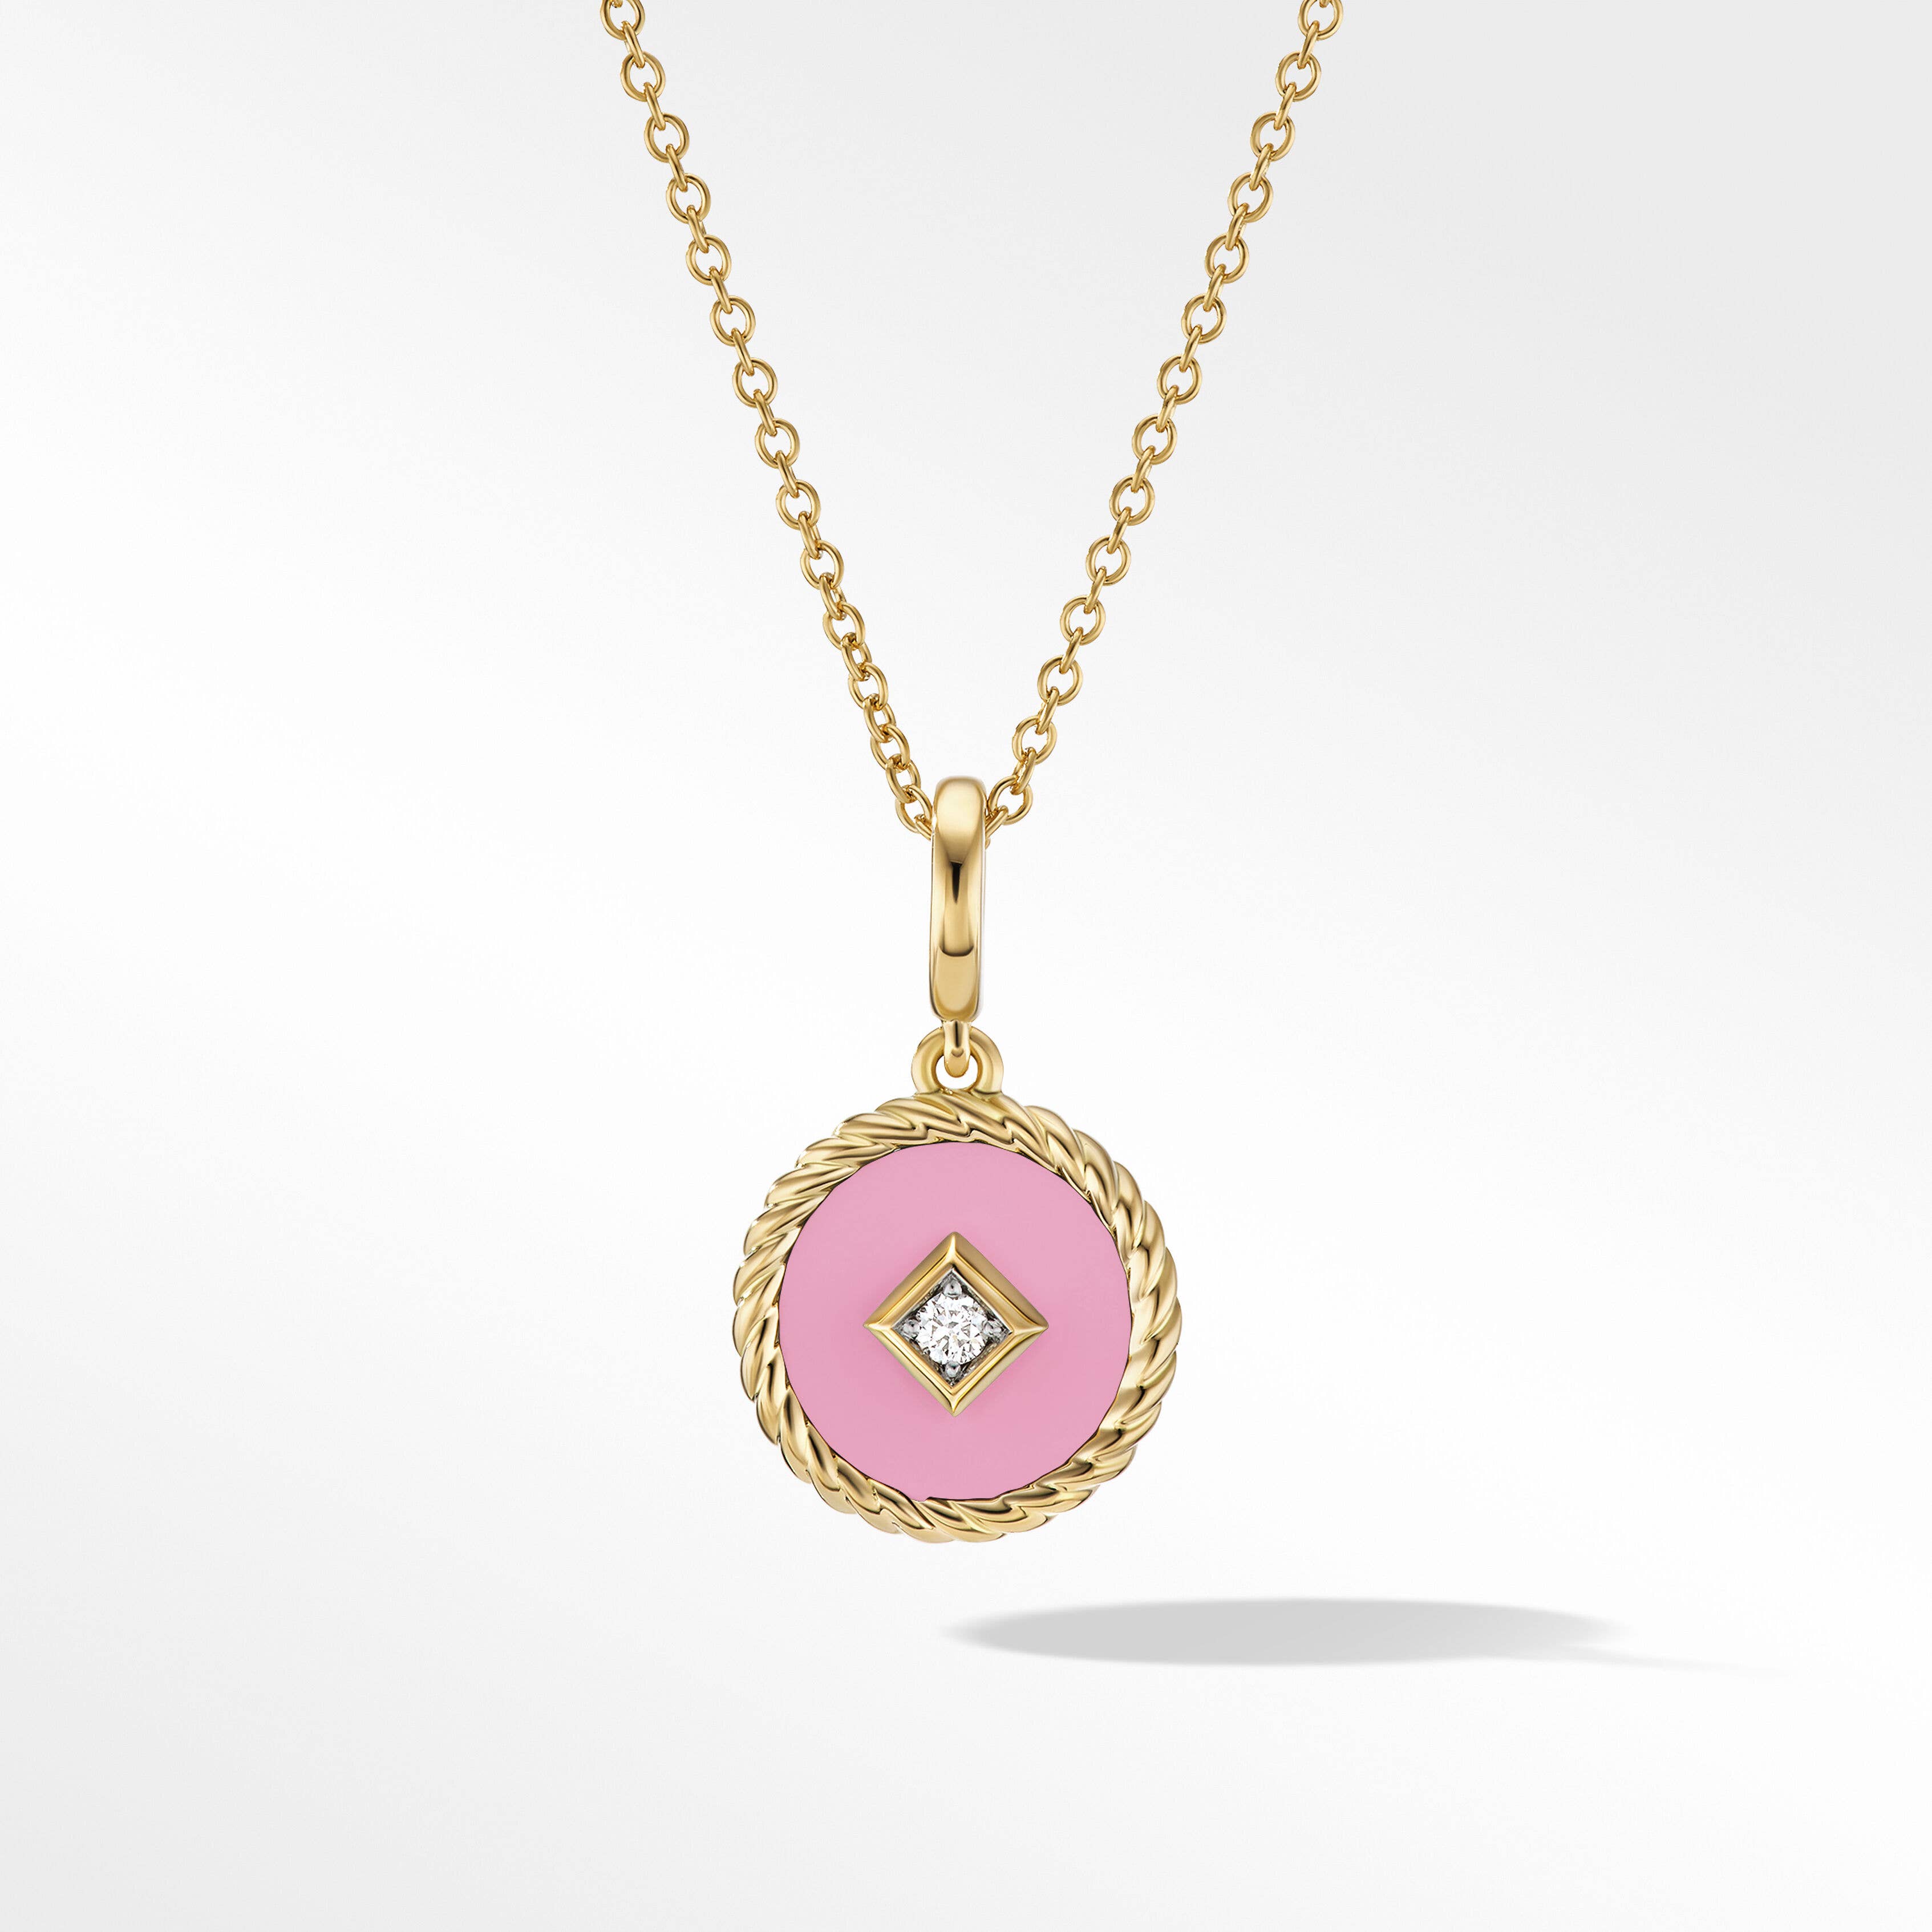 Cable Collectibles® Blush Enamel Charm Necklace in 18K Yellow Gold with Center Diamond